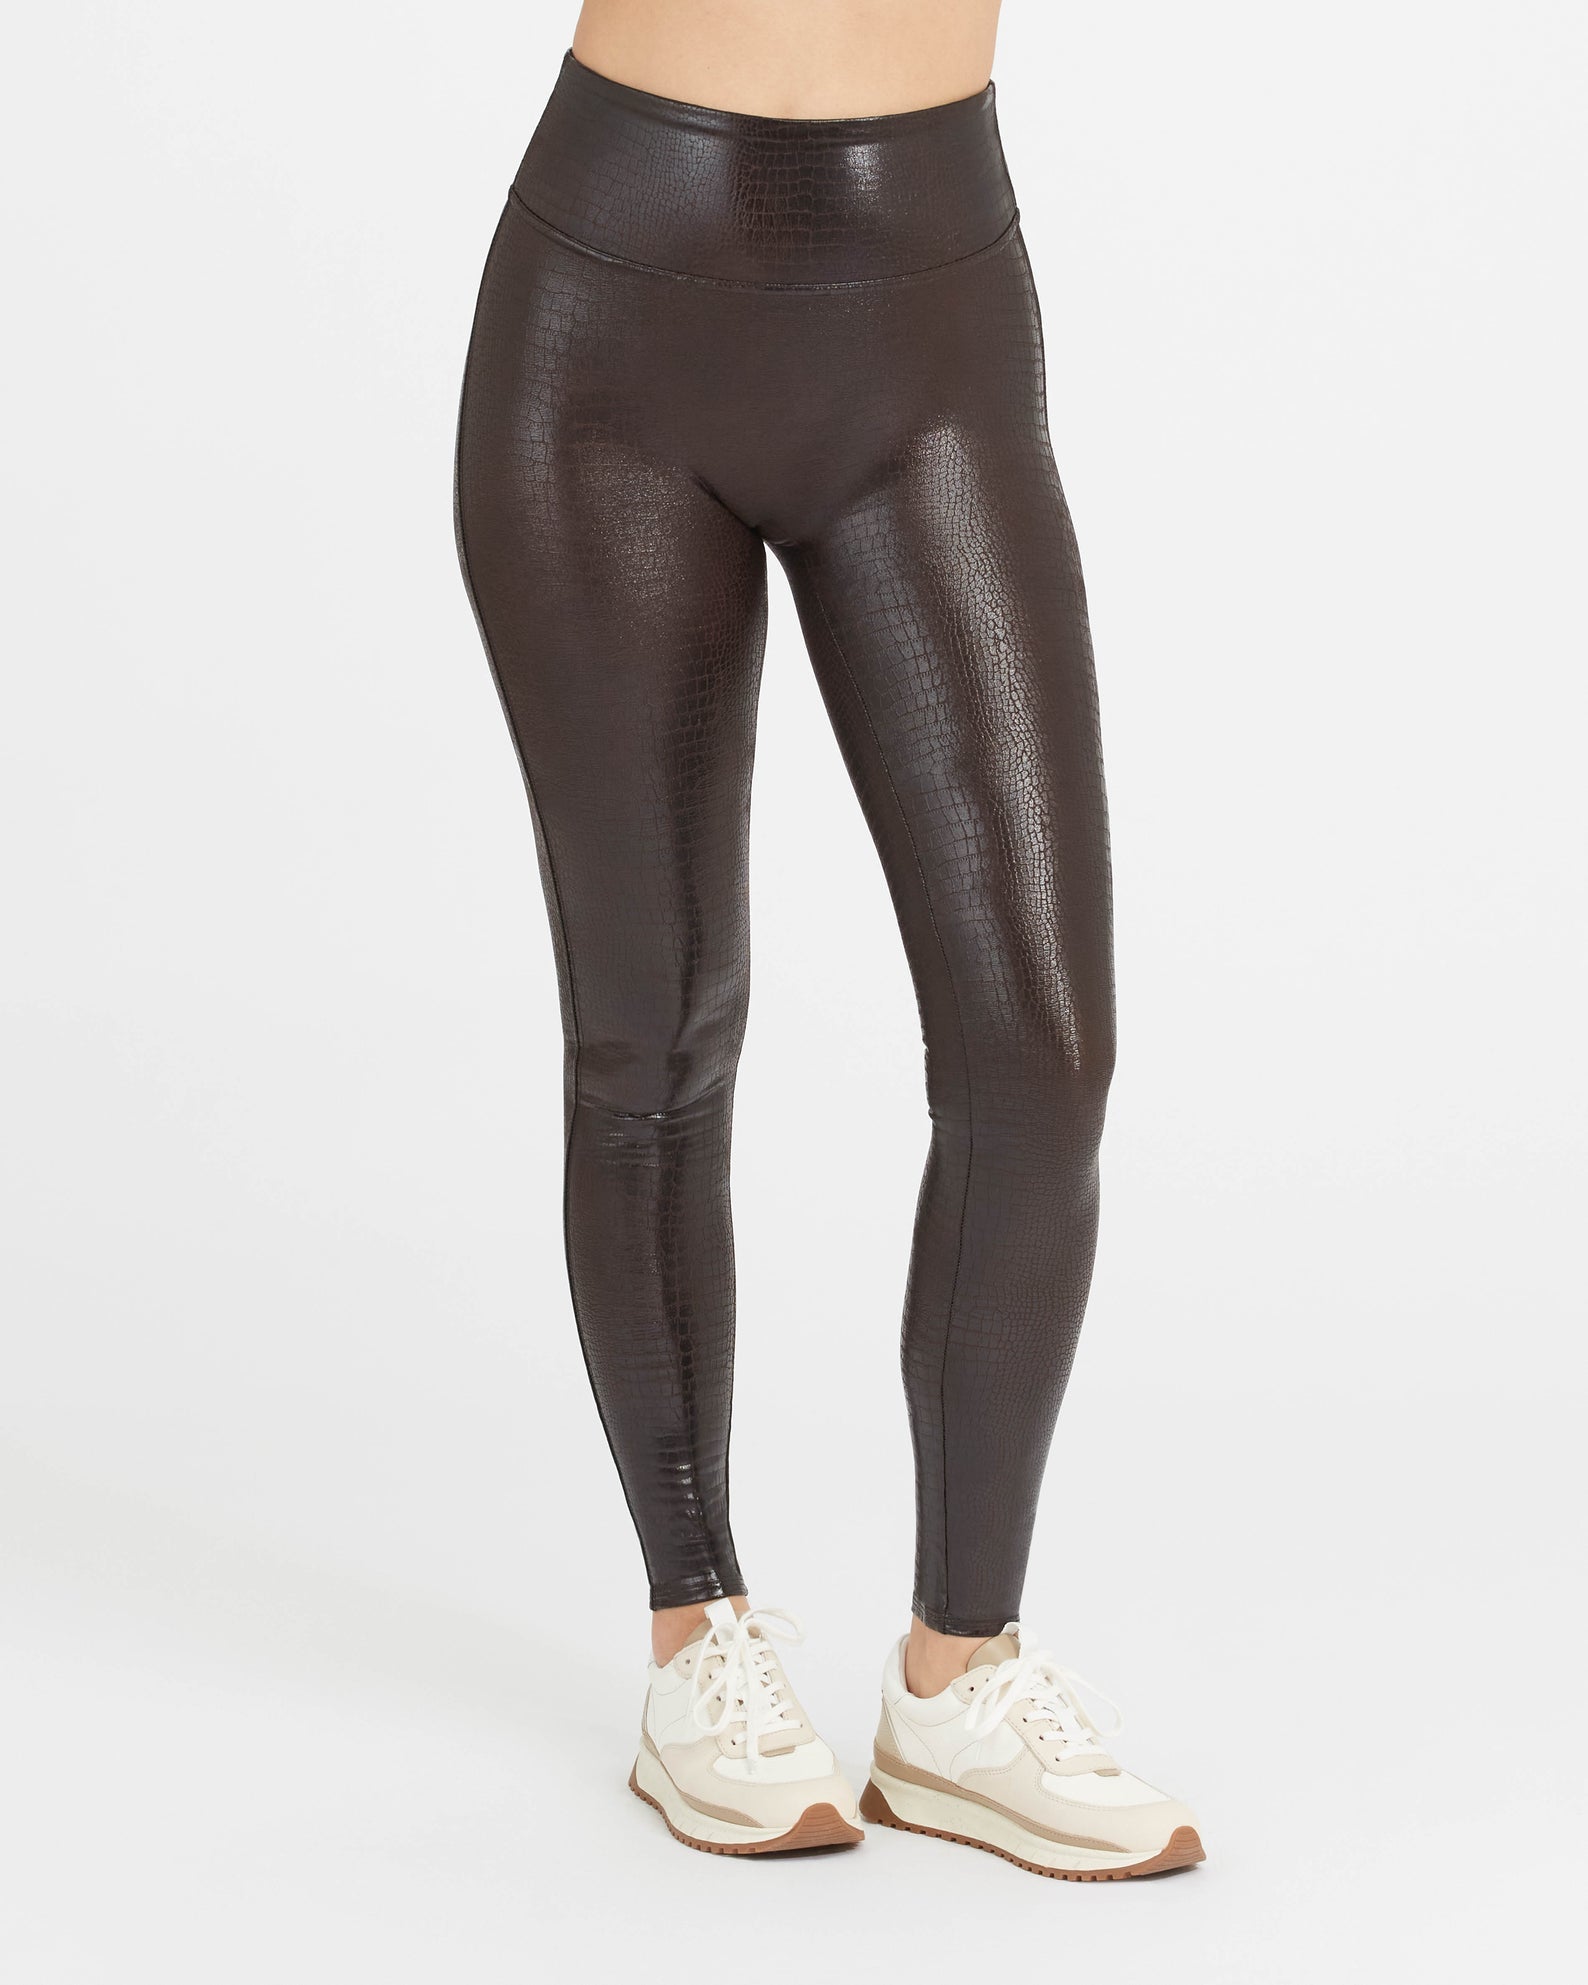 SPANX - In these leggings, you're everyone's asspiration